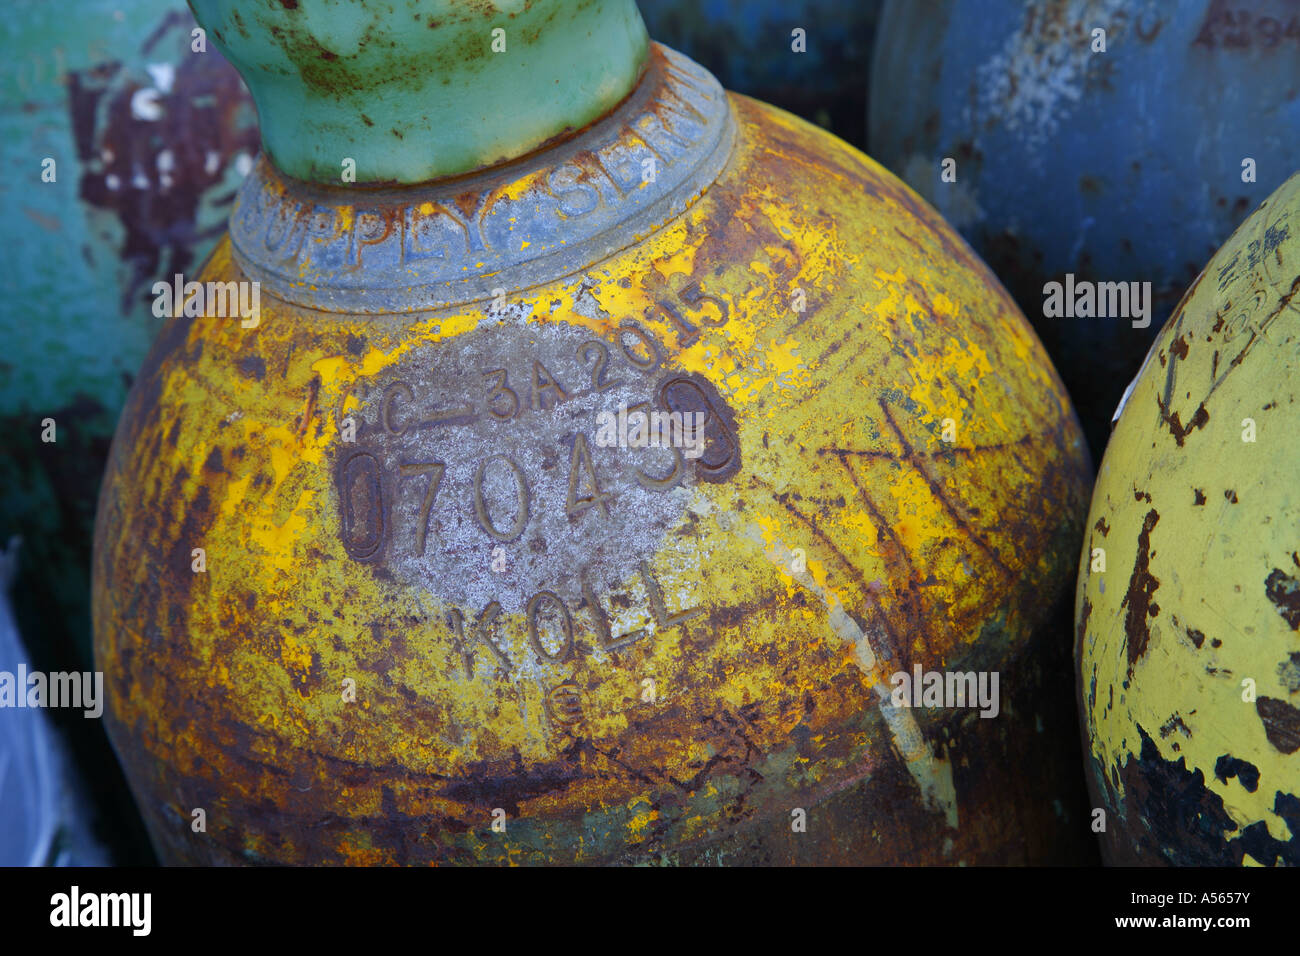 Abstract Of Gas Tanks At The Orange Empire Museum Perris Riverside County California United States Stock Photo